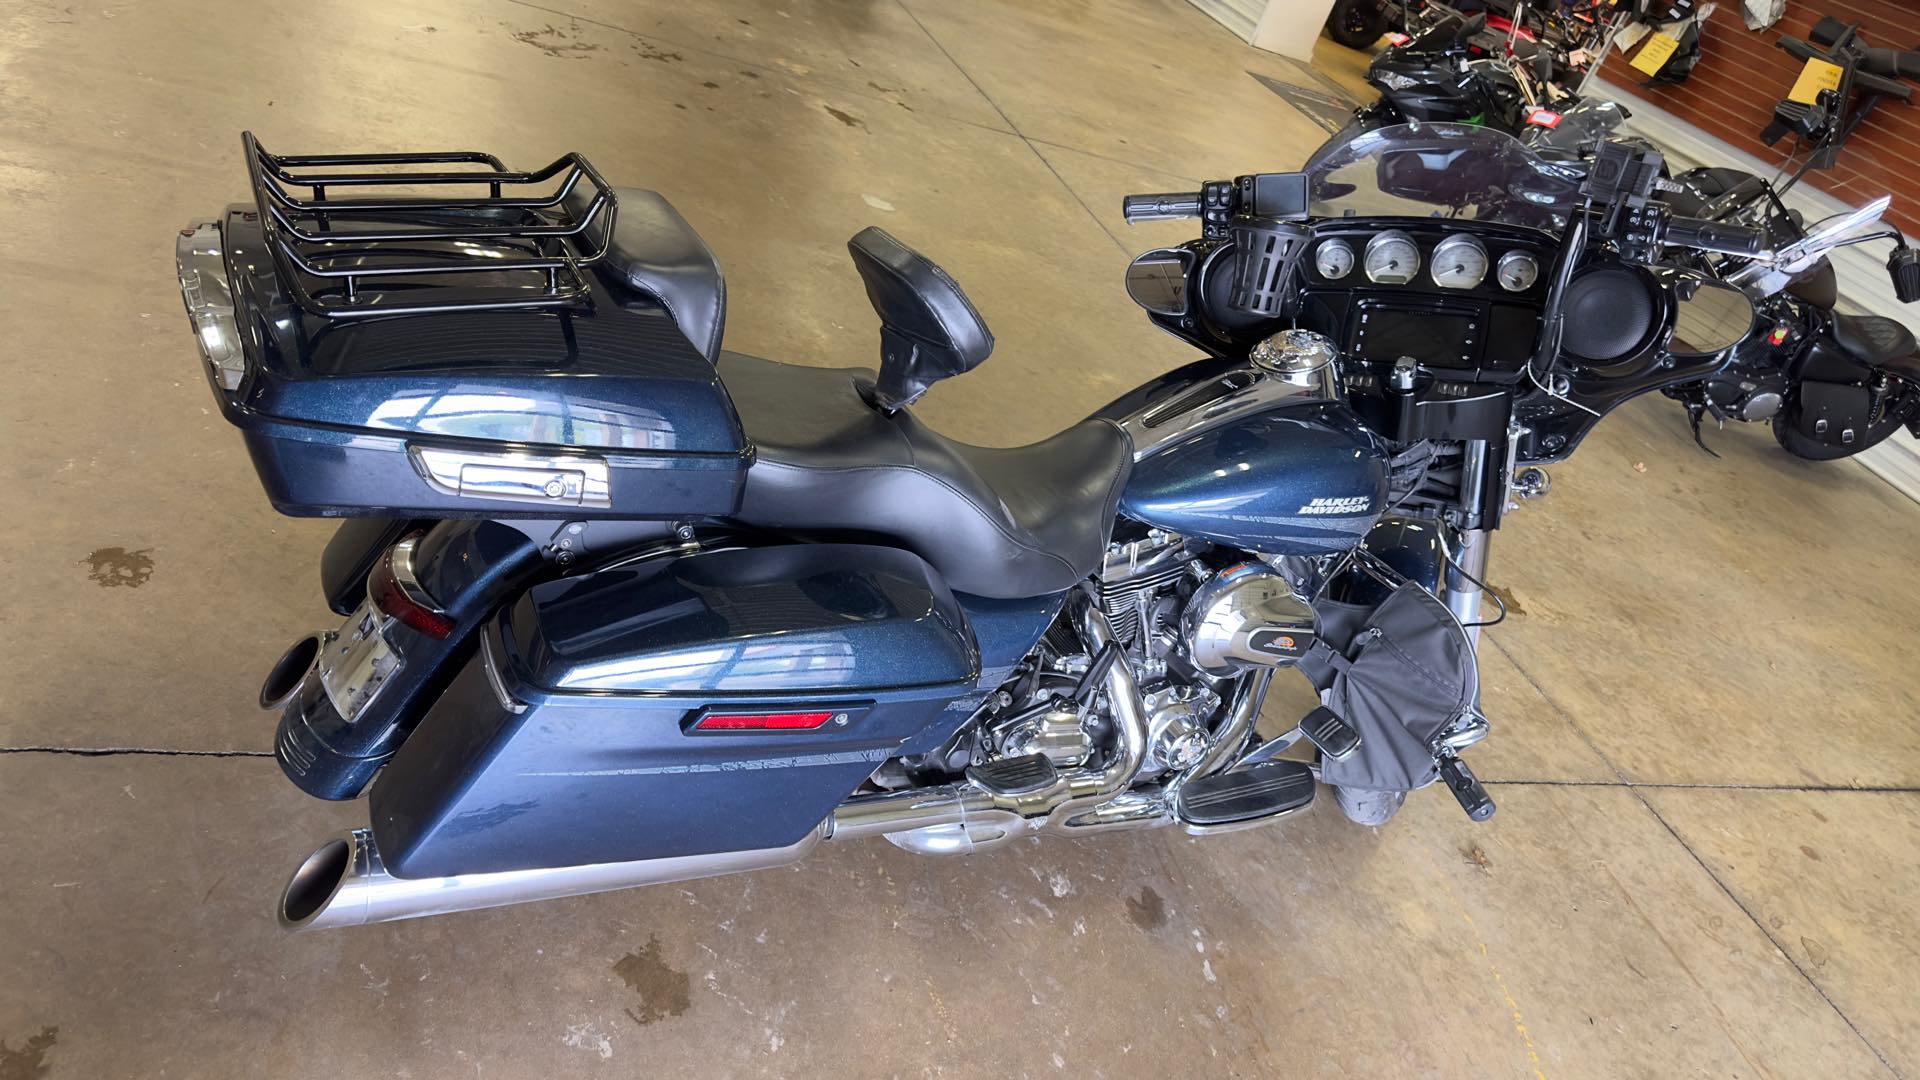 2016 Harley-Davidson Street Glide Special at Southern Illinois Motorsports